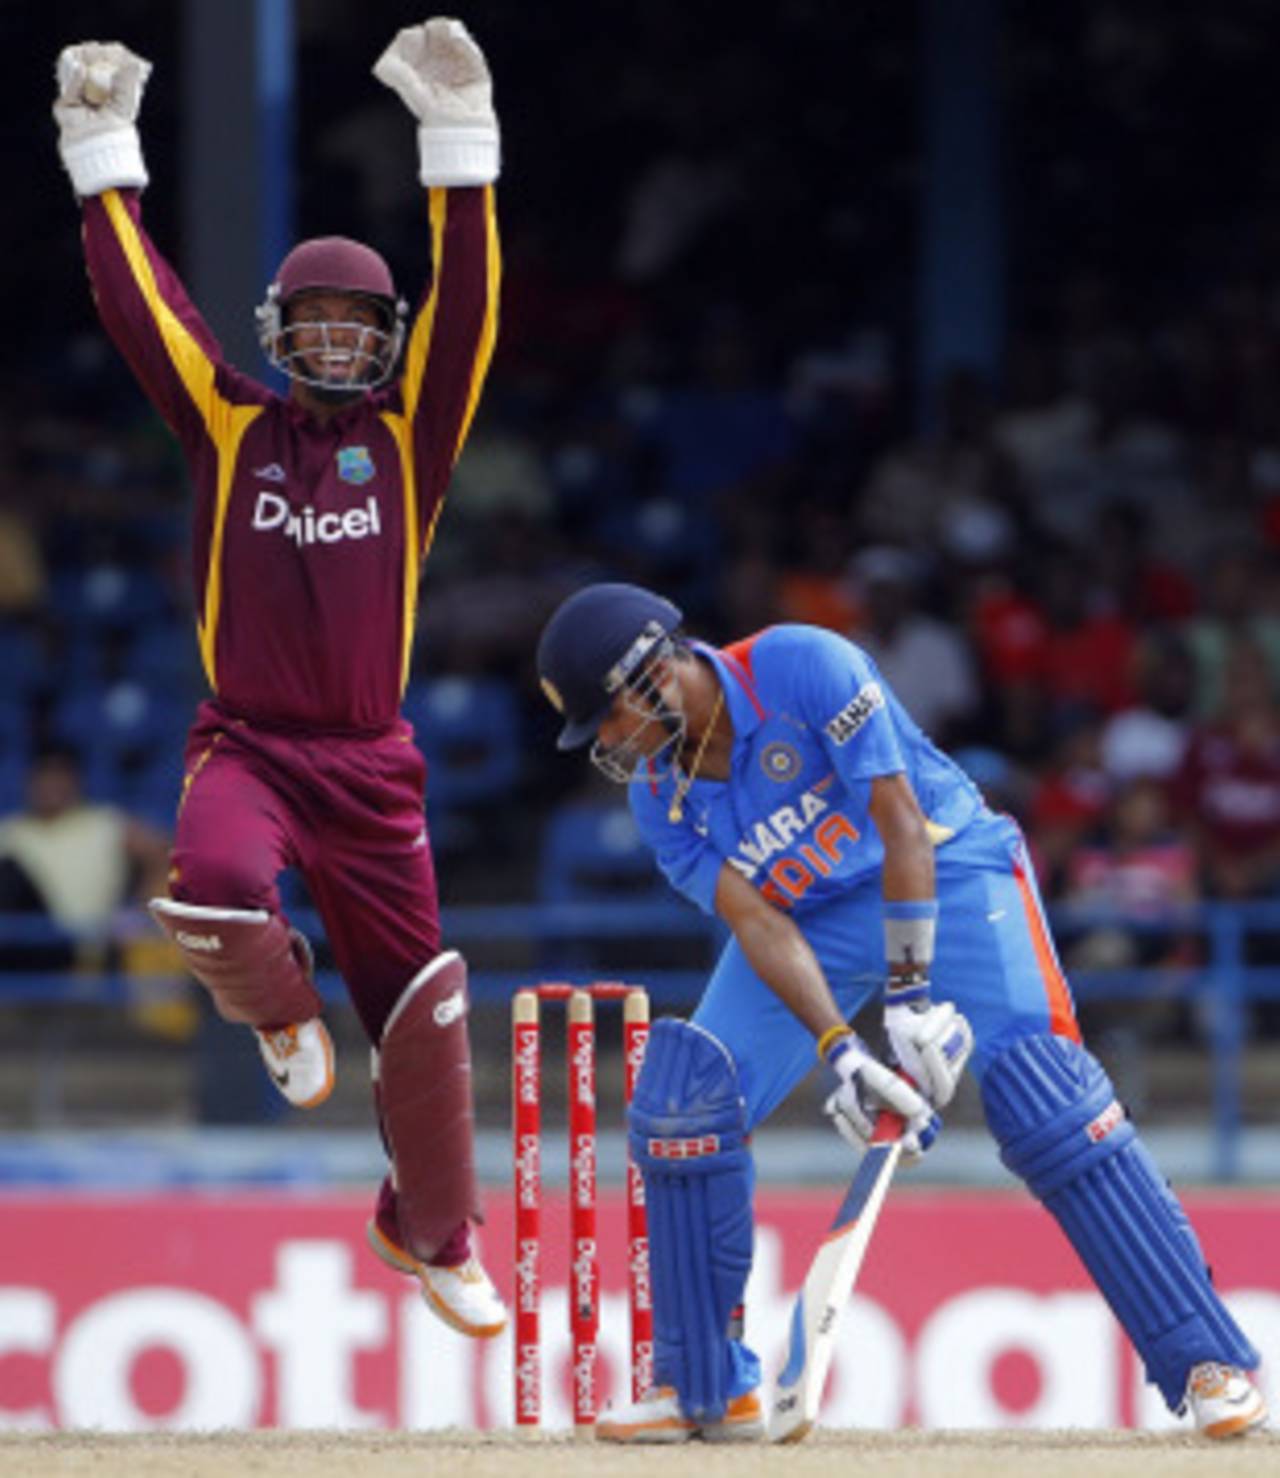 Despite a strong showing on the domestic circuit and the IPL, S Badrinath has failed to make the most of his international opportunities&nbsp;&nbsp;&bull;&nbsp;&nbsp;Associated Press